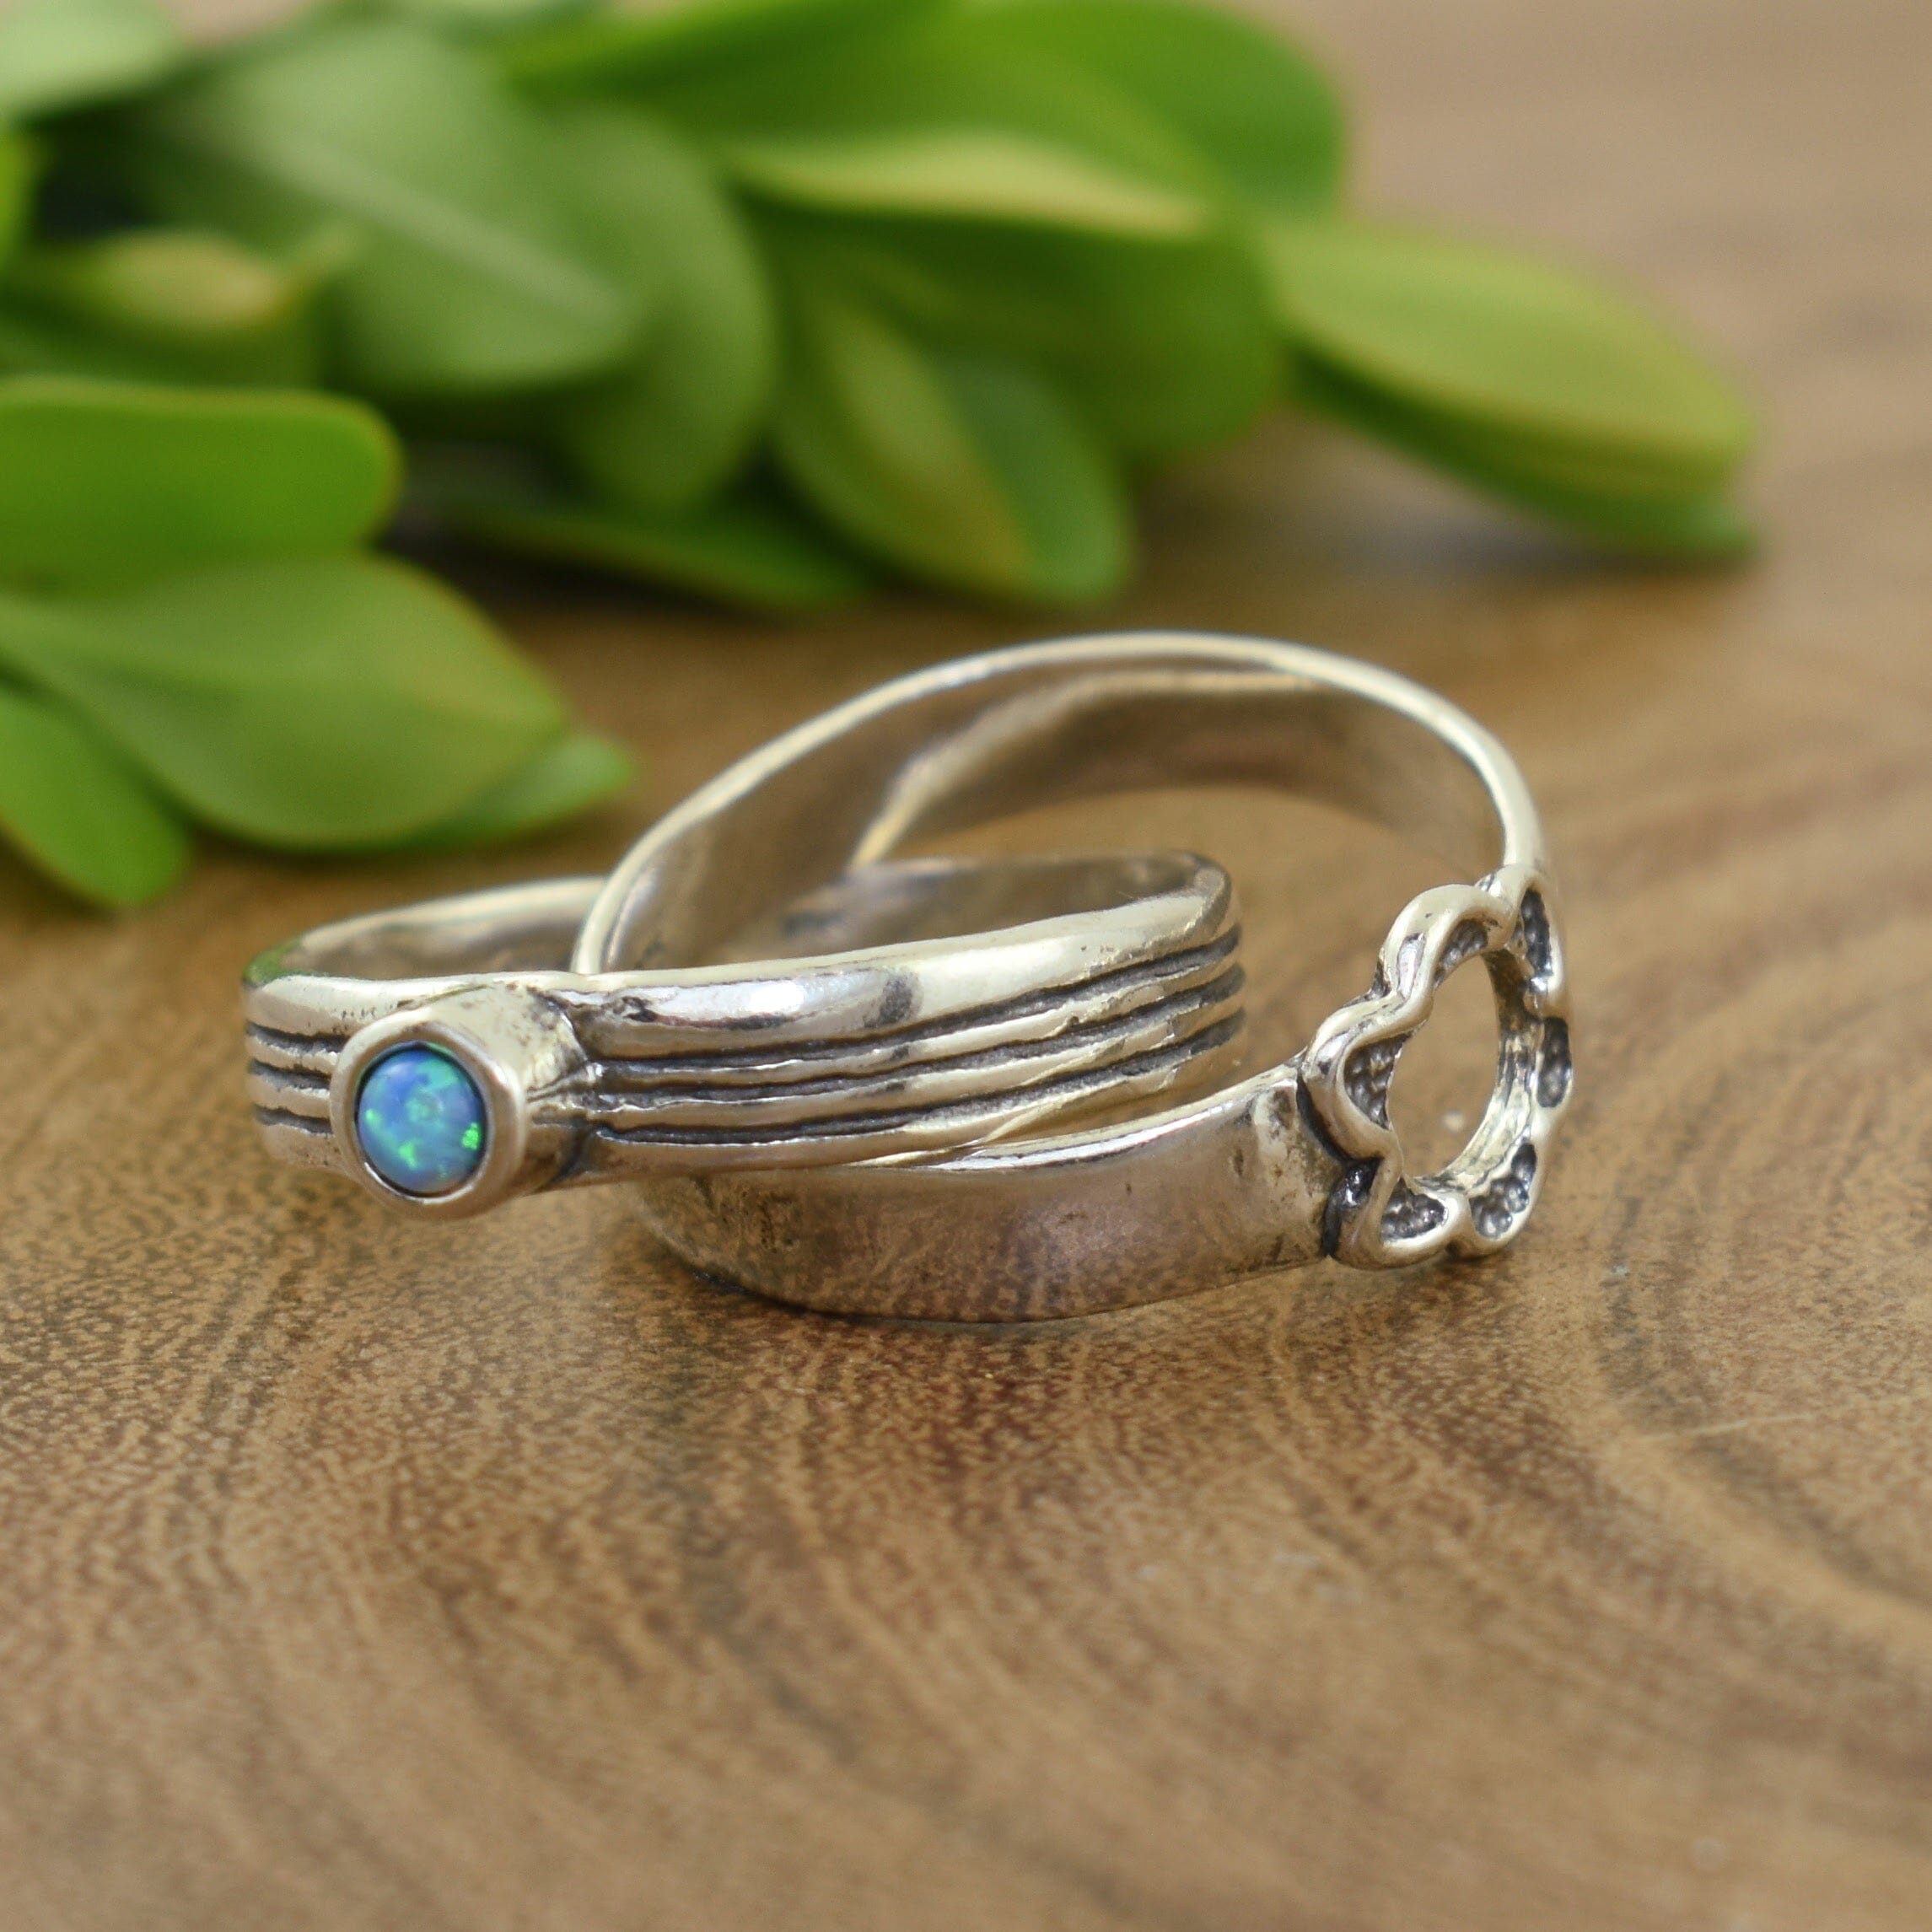 Sterling silver flower ring with reconstructed opal stone